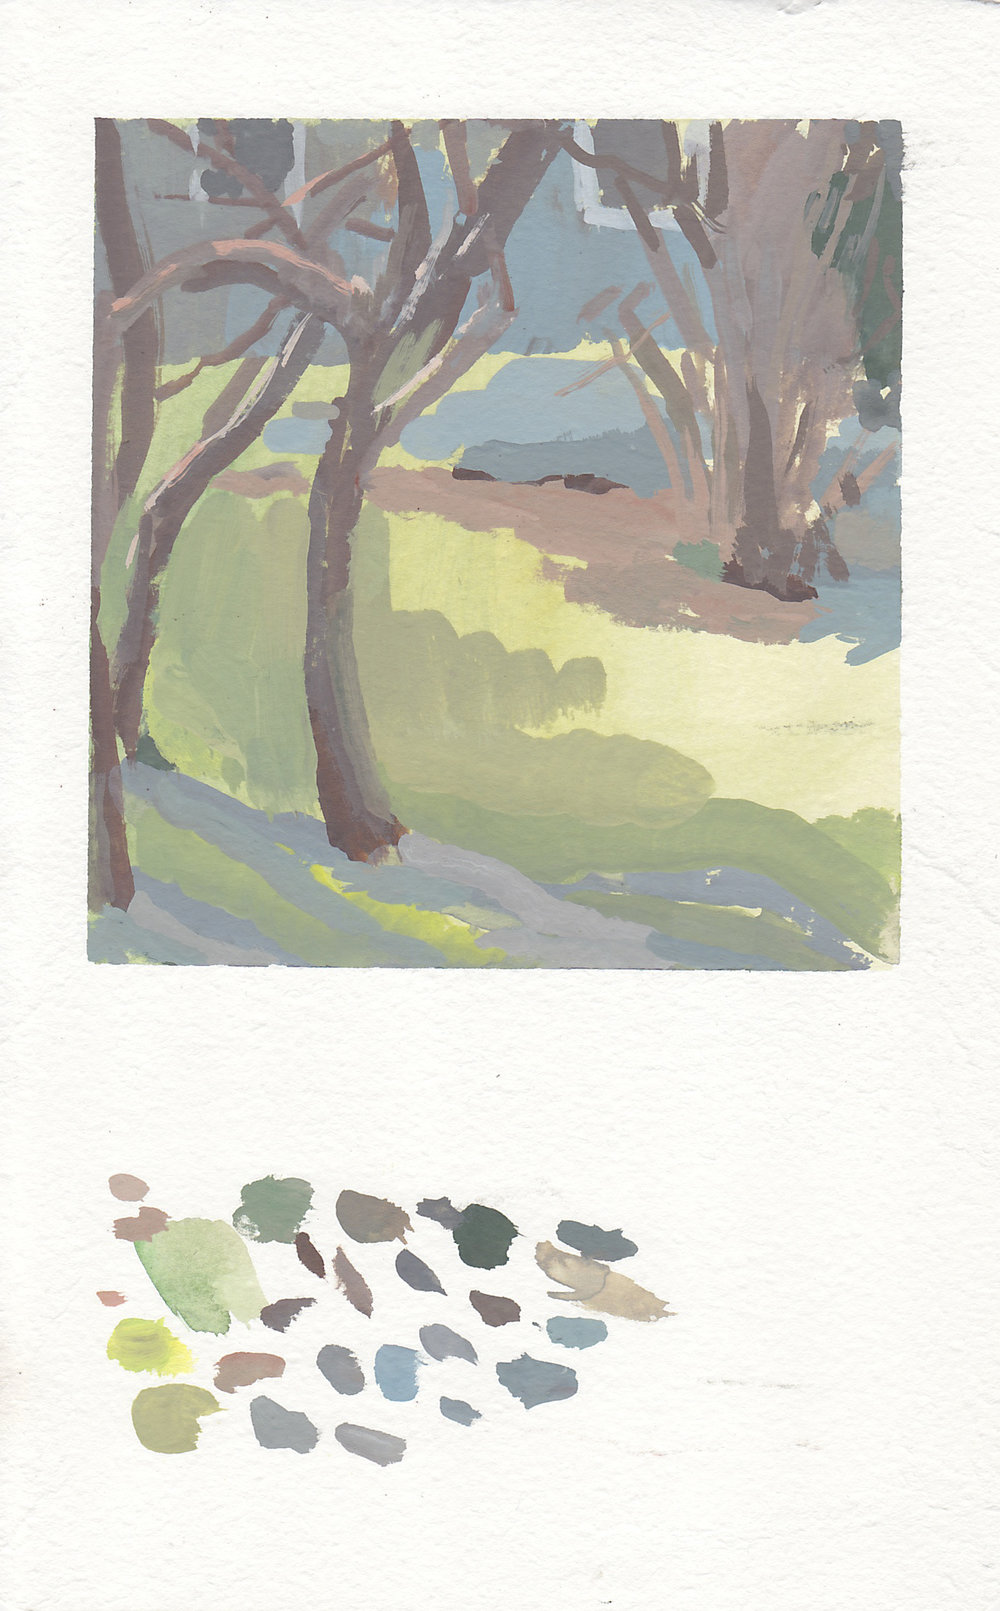  plum tree in february, gouache on paper, 4x4,"  purchase  